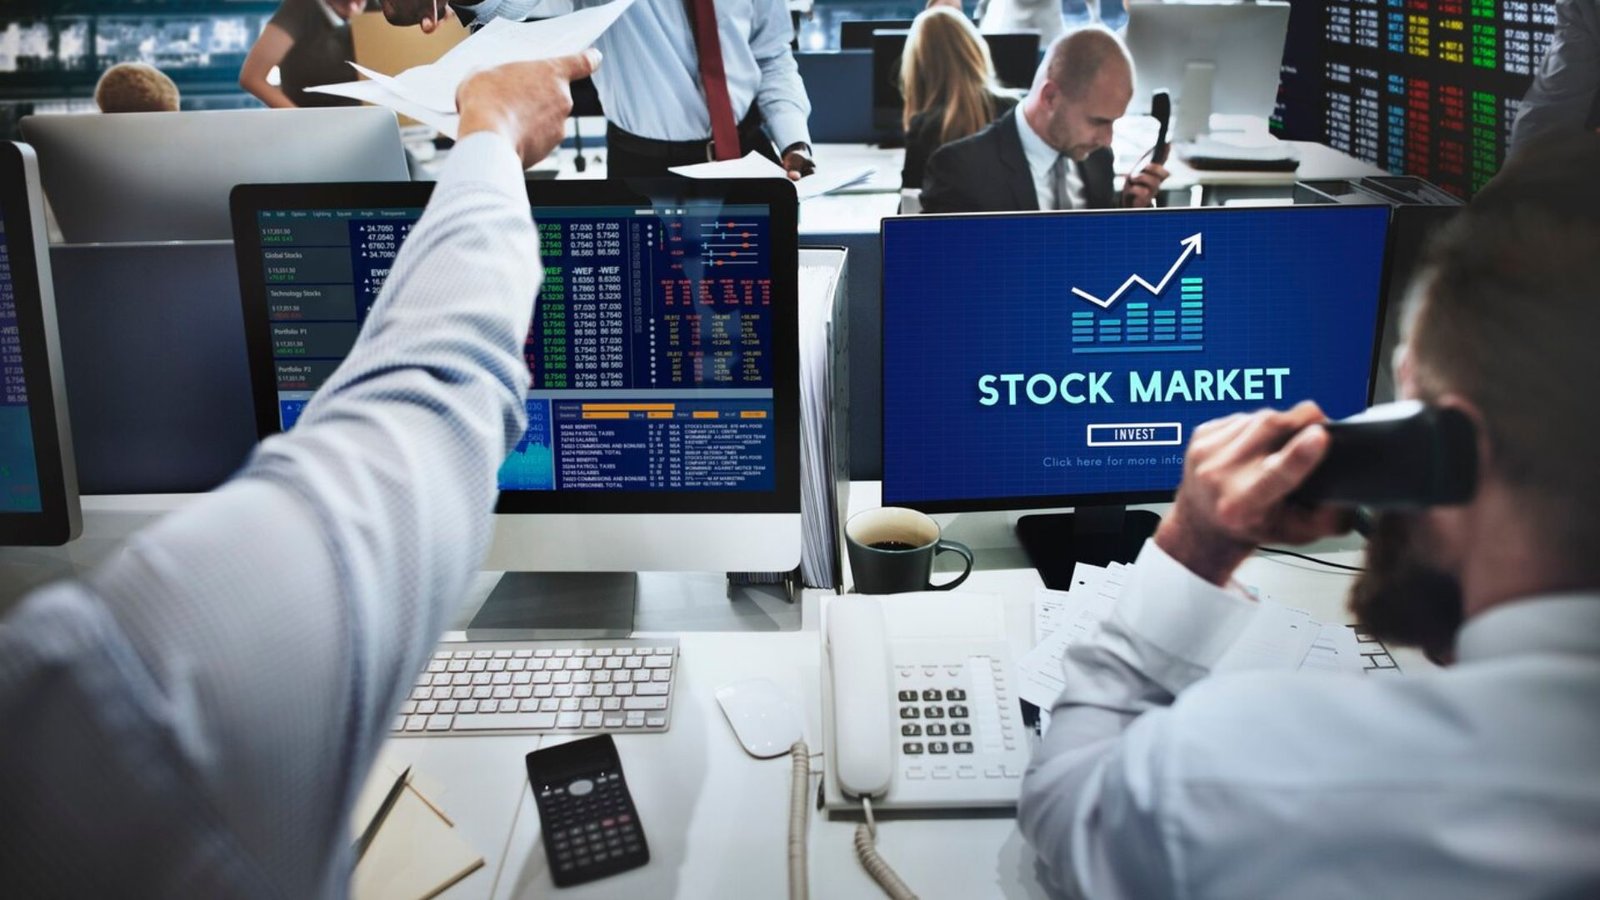 Stock Market Office with people receiving phone calls